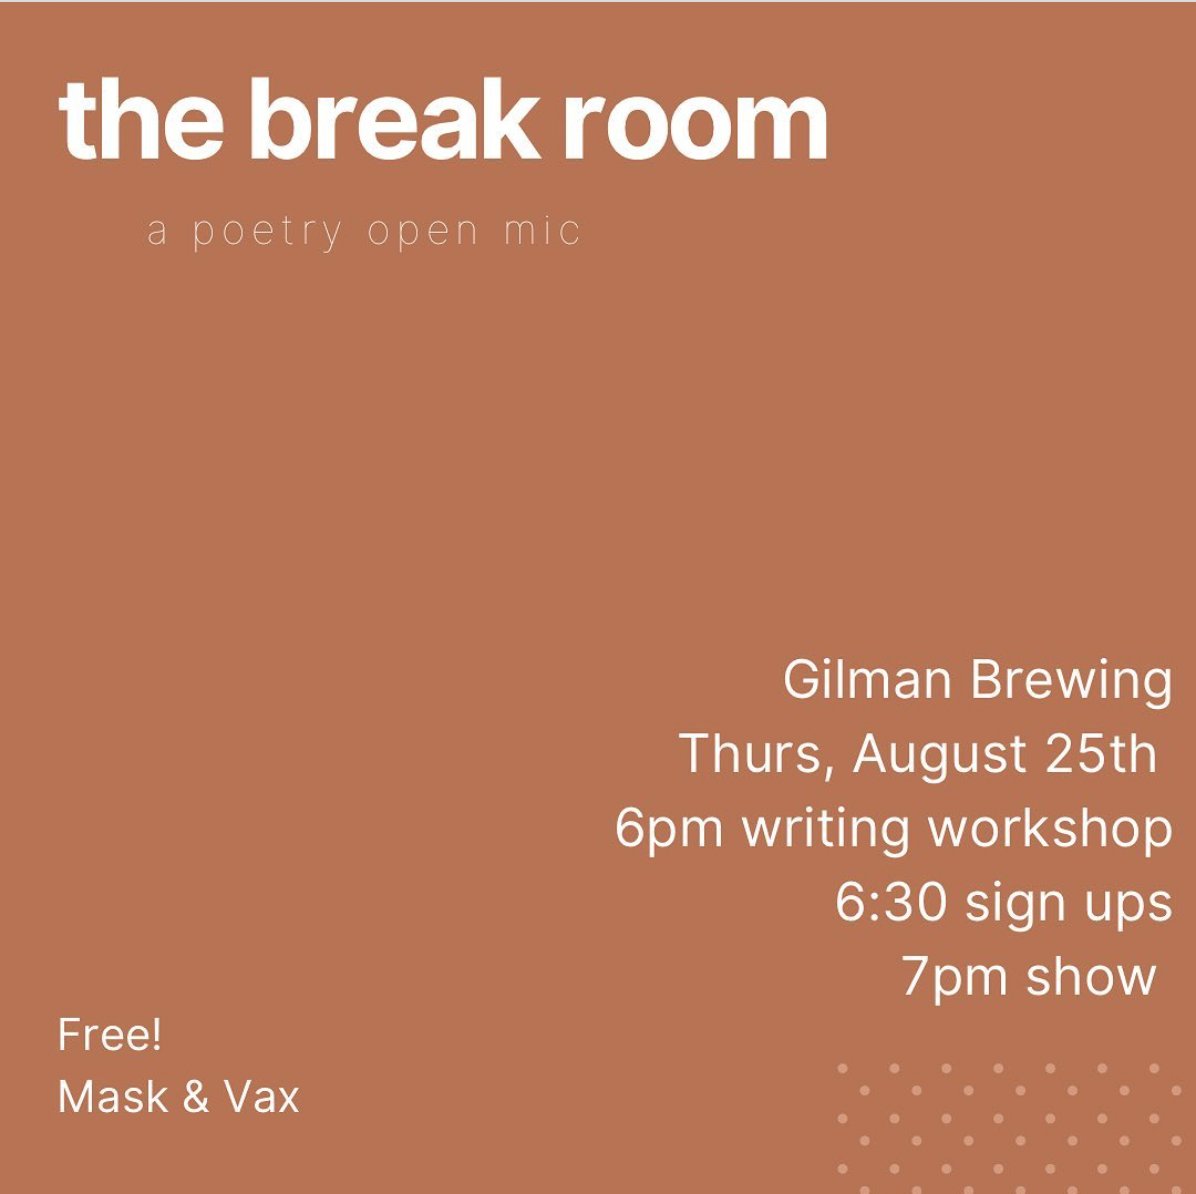 (the break room!) Next Thursday at @gilman_brewing come say poems with me @hieuminhnguyen & @jasonbayani. I'll be leading a little generative workshop beforehand